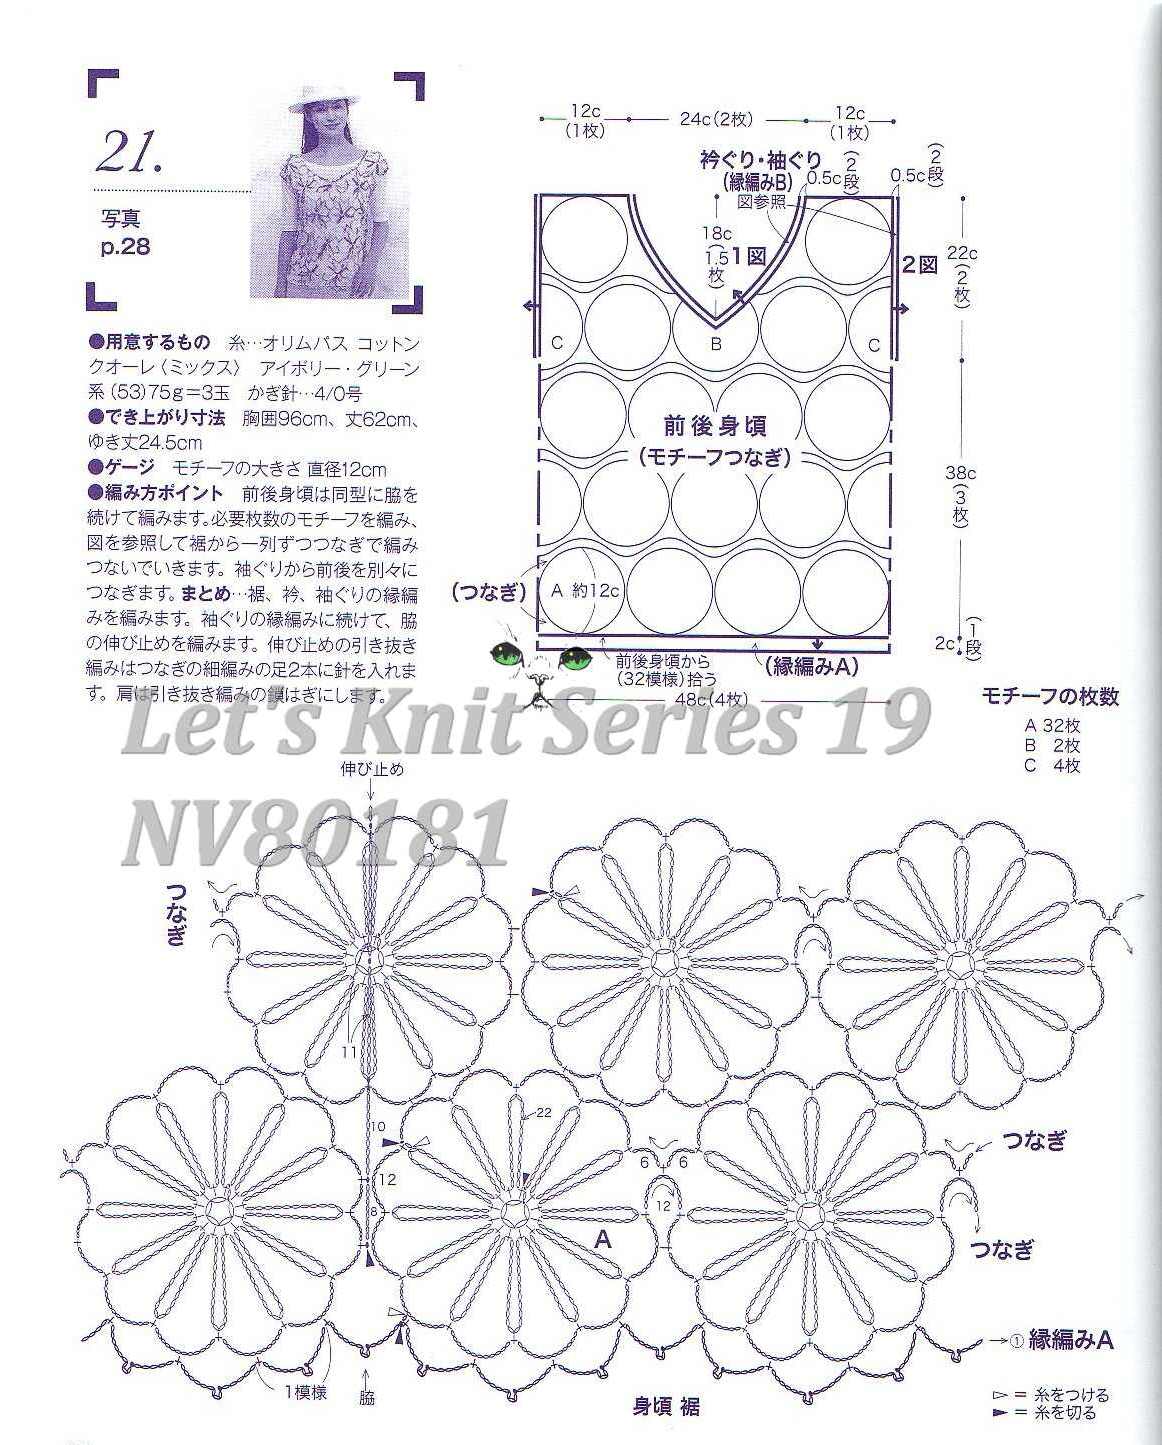 2066_Let's Knit Series 19 NV80181127 (2)